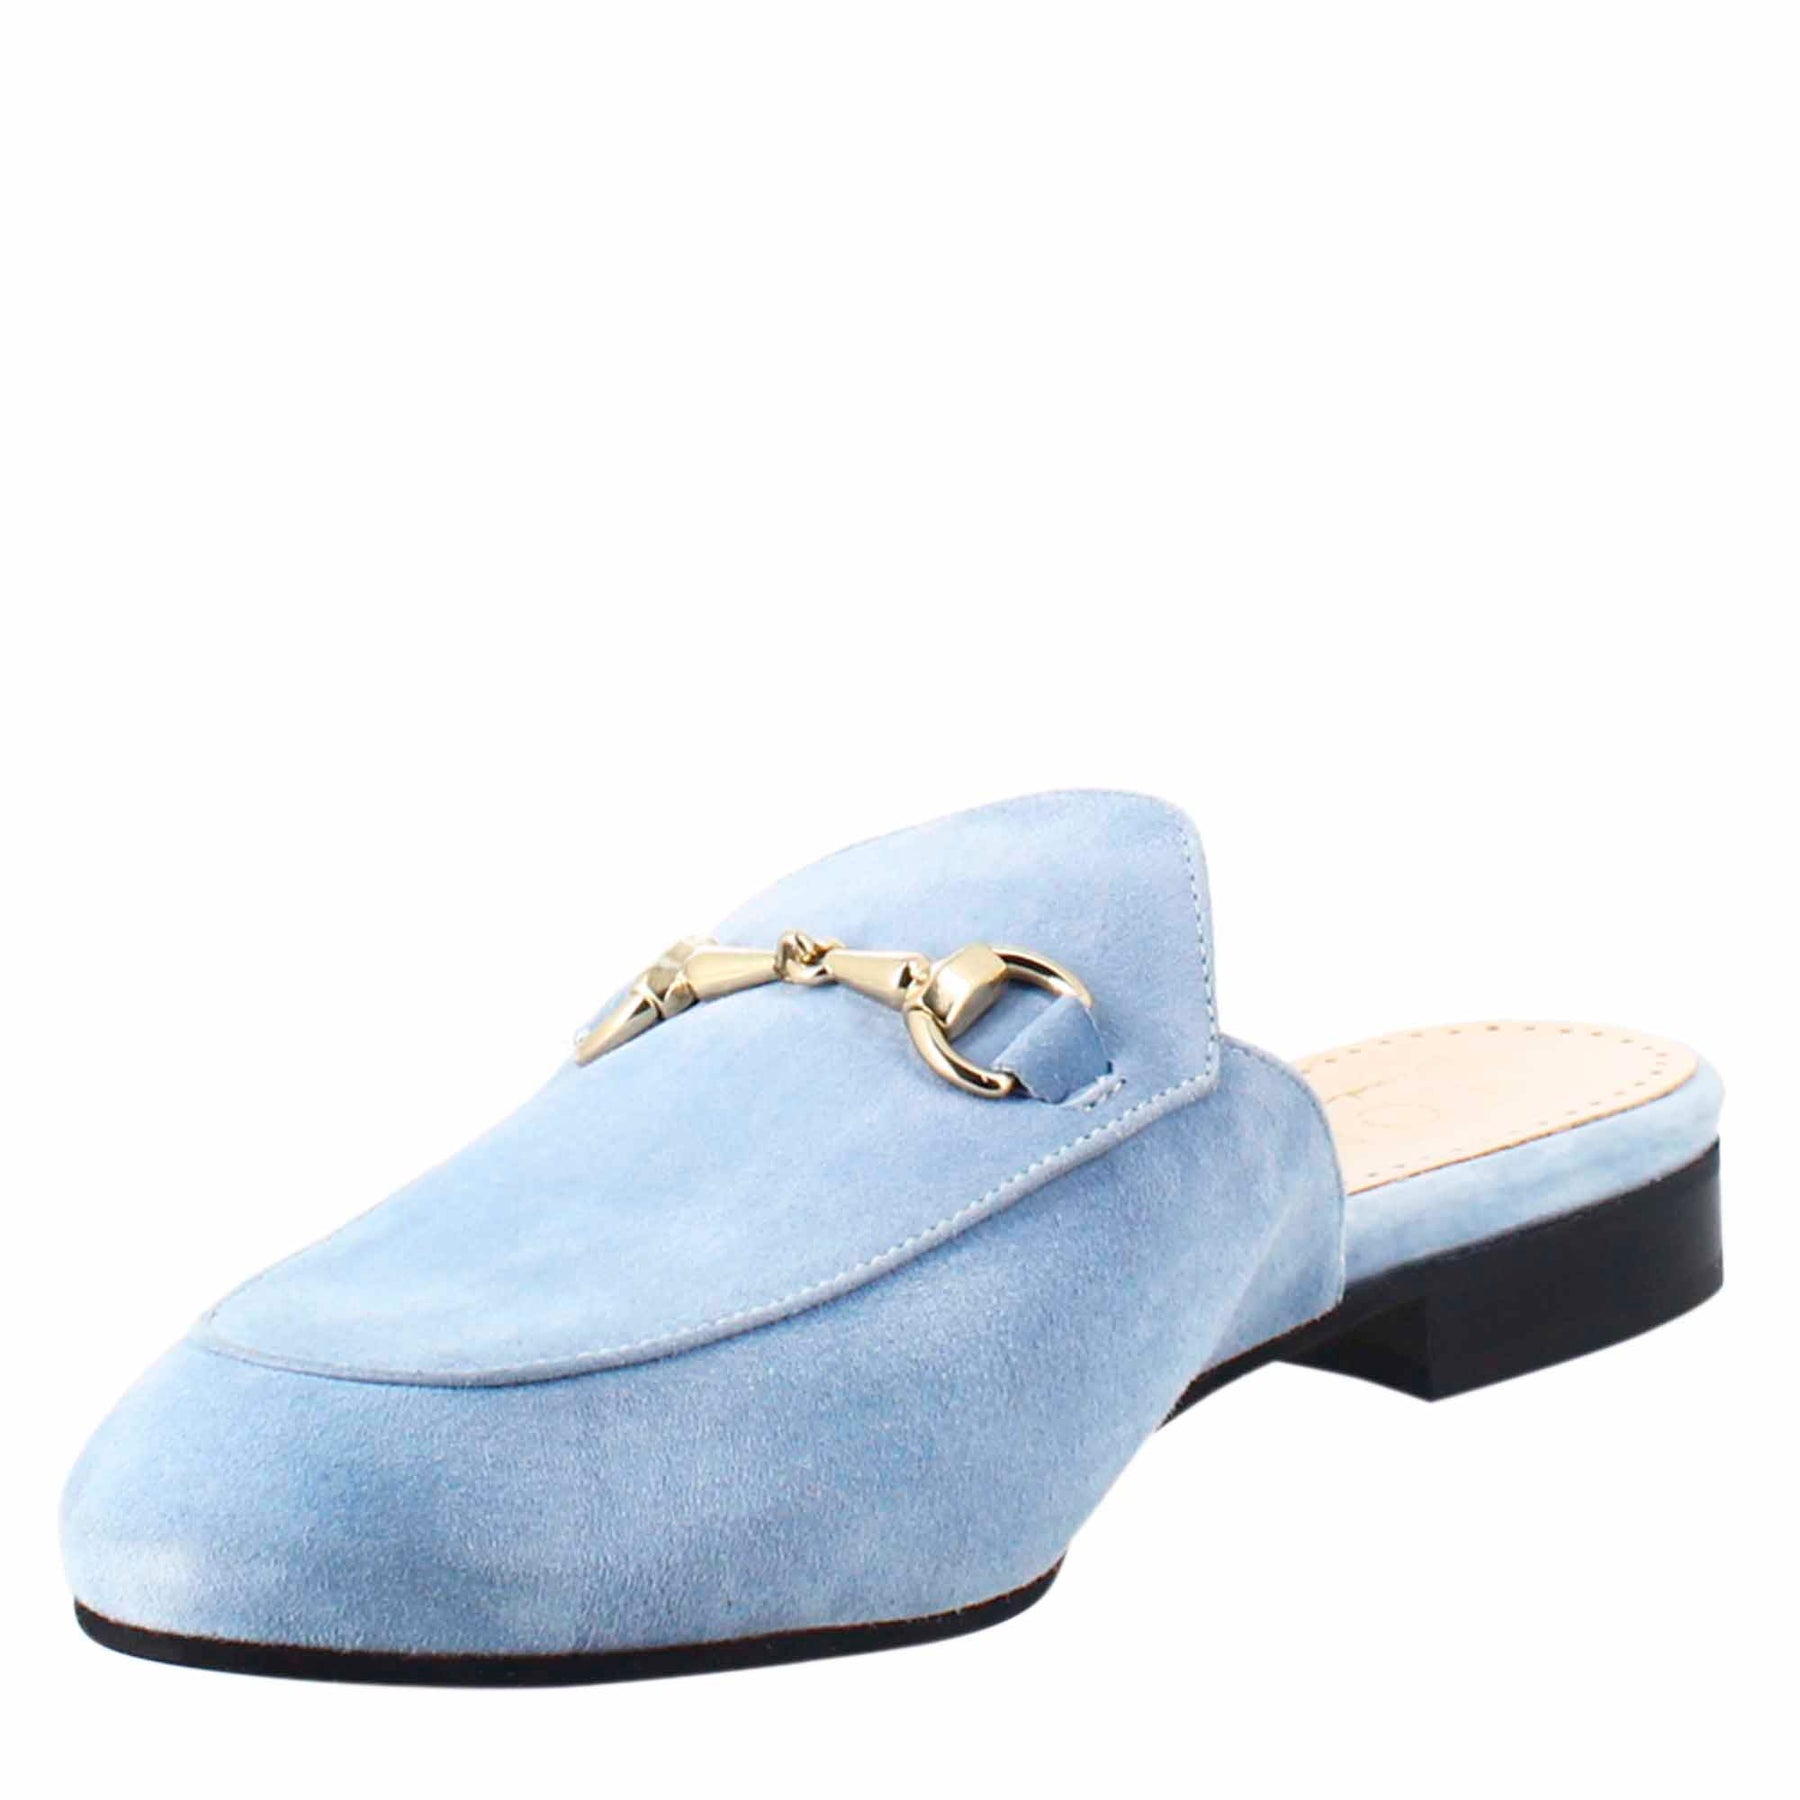 Women's sabot in light blue suede with gold buckle